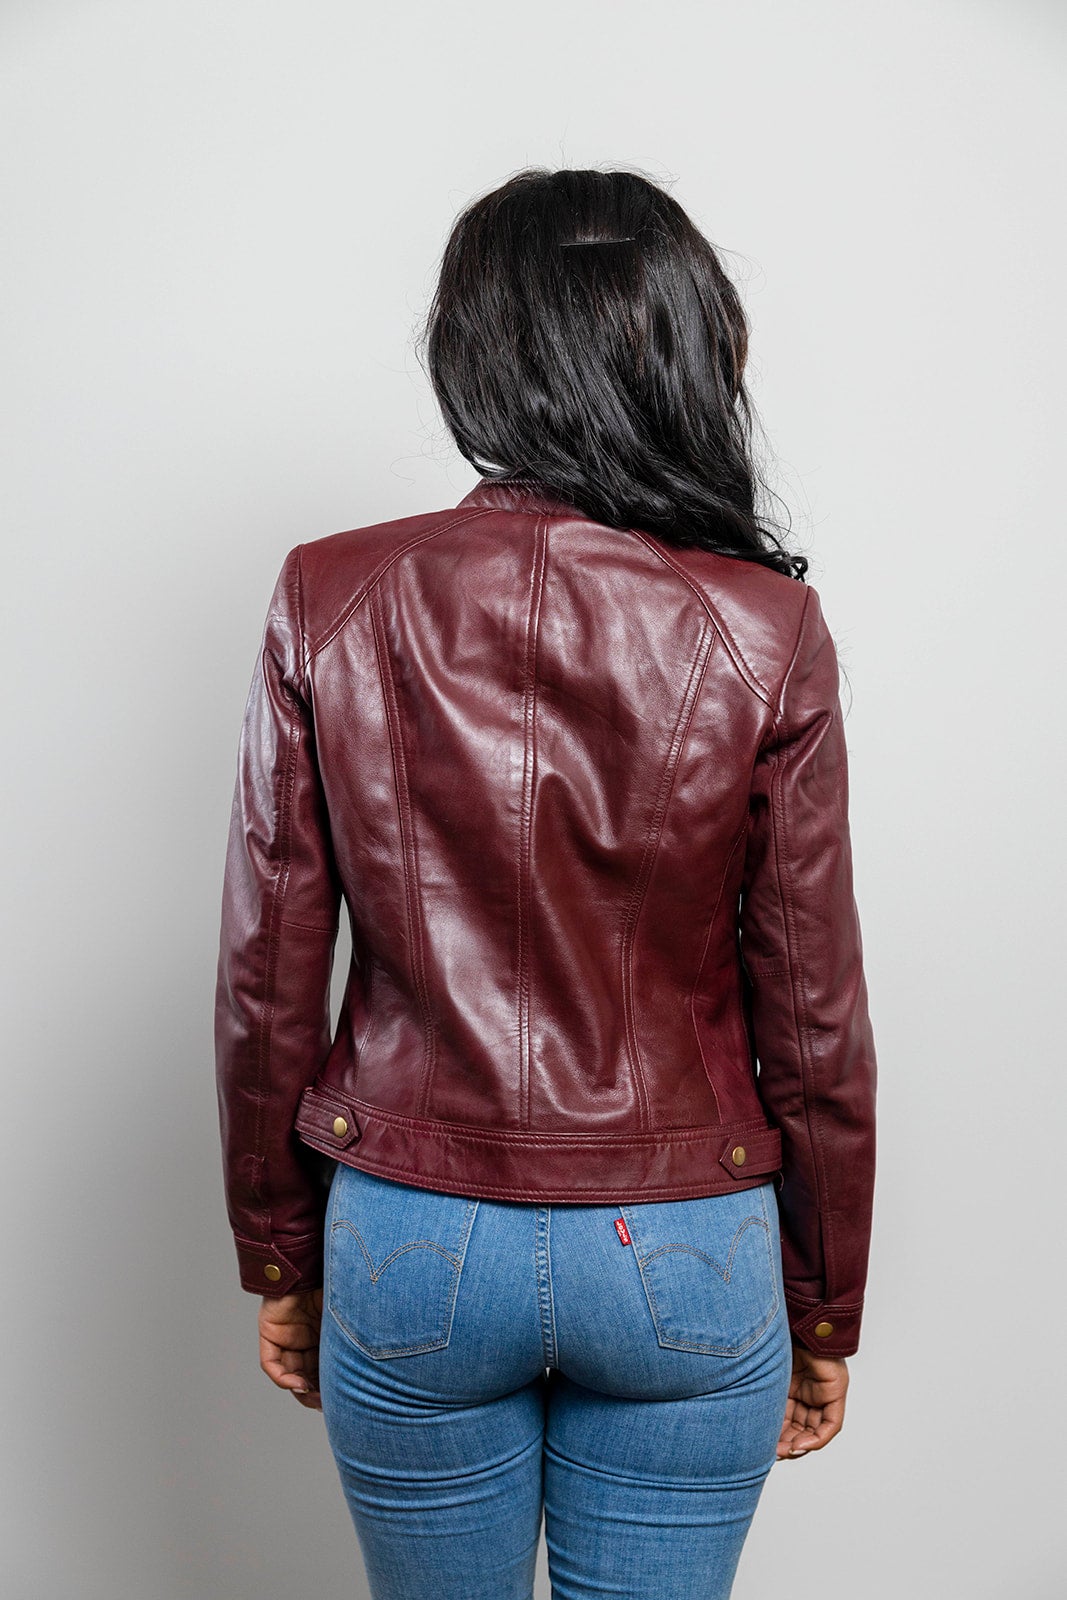 This classic cut genuine leather jacket is perfect for any occasion, from the Whet Blu line.  Dyed Leather. Zipper front. Long sleeves with adjustable snap cuffs. Wind resistant shell. Three outside pockets. Two inside pockets. Designed to hit just below the waist. Lightweight. Lining is polyester. dry clean. Imported. Available in sizes XS-5X, online only. Colors: army green, night blue, whiskey, black and oxblood. Back lifestyle view